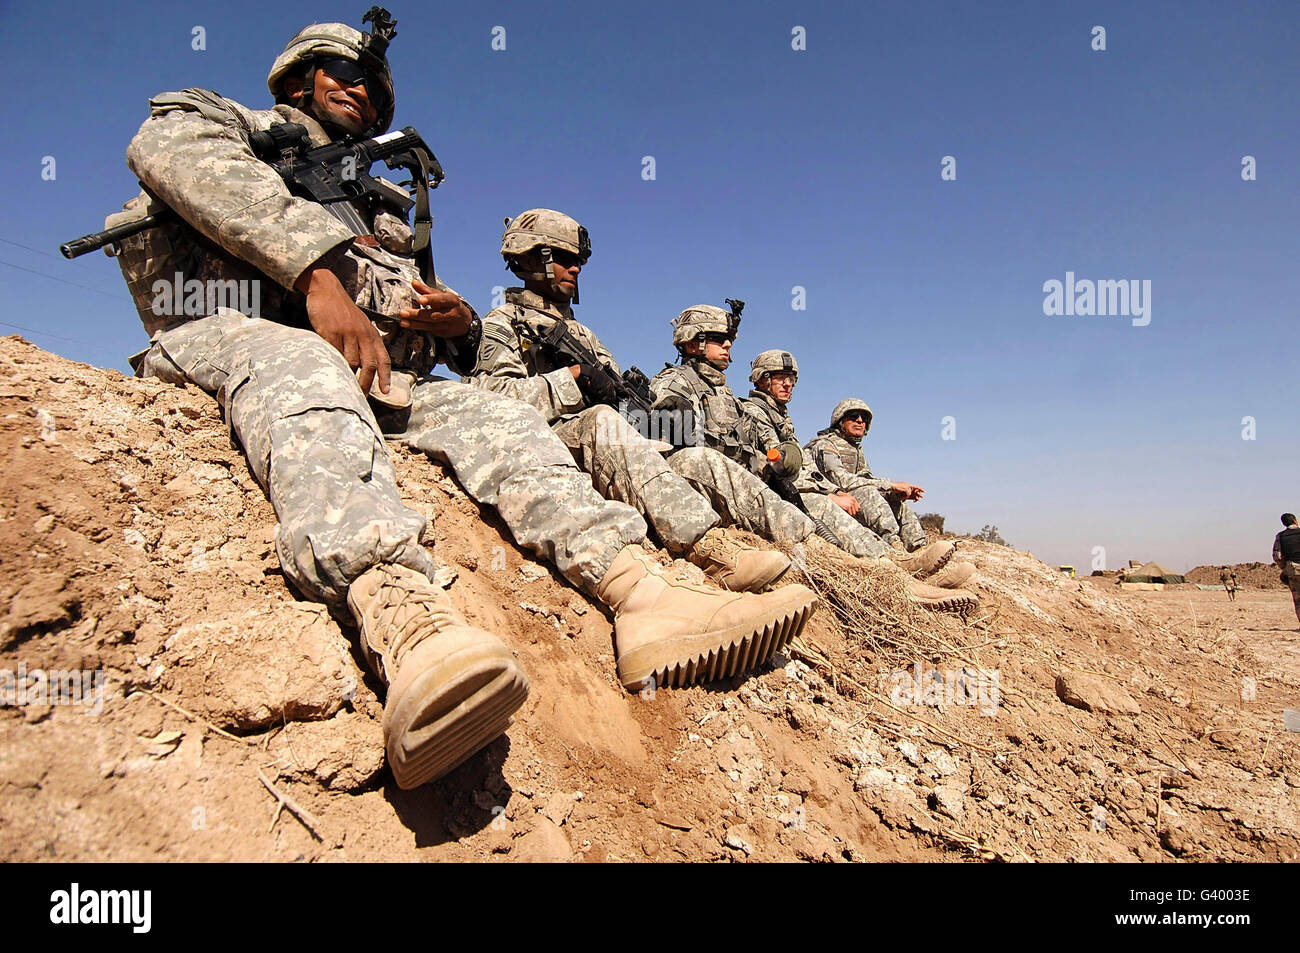 U.S. Army soldiers and Iraqi army soldiers taking a break during training at Tanmiya, Iraq. Stock Photo